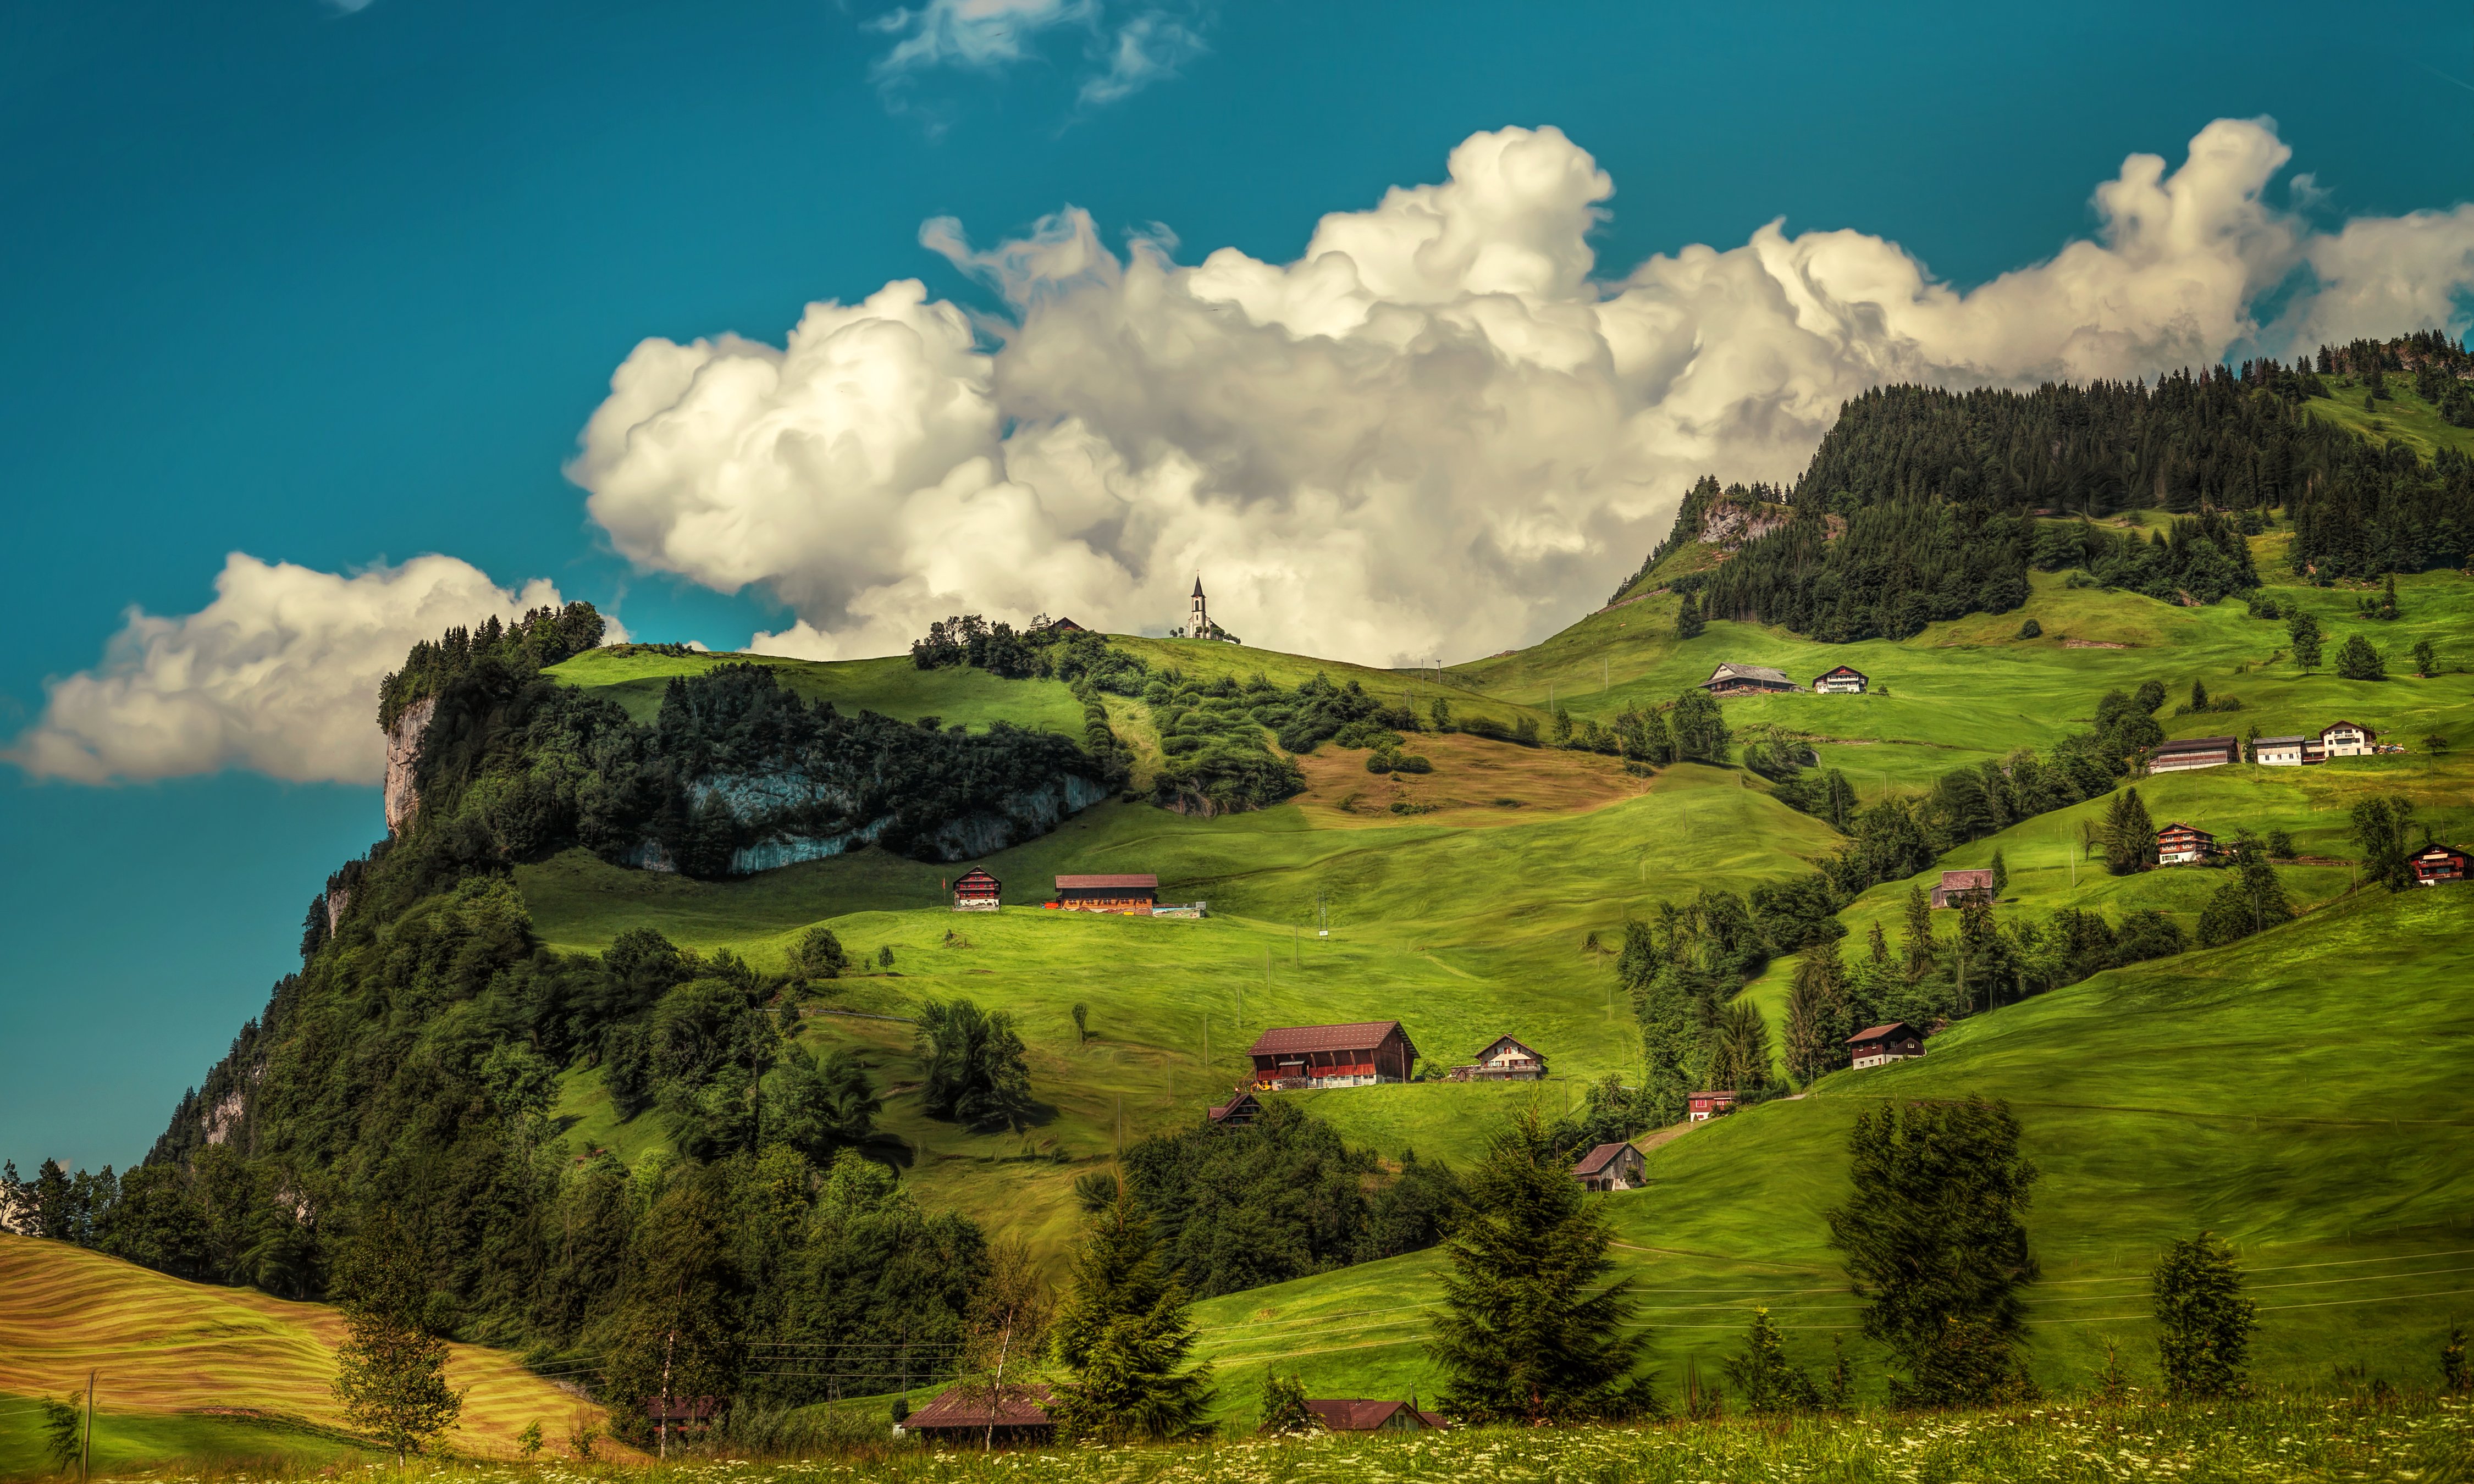 switzerland, Mountains, Forests, Houses, Grasslands, Scenery, Hdr, Clouds, Nature Wallpaper